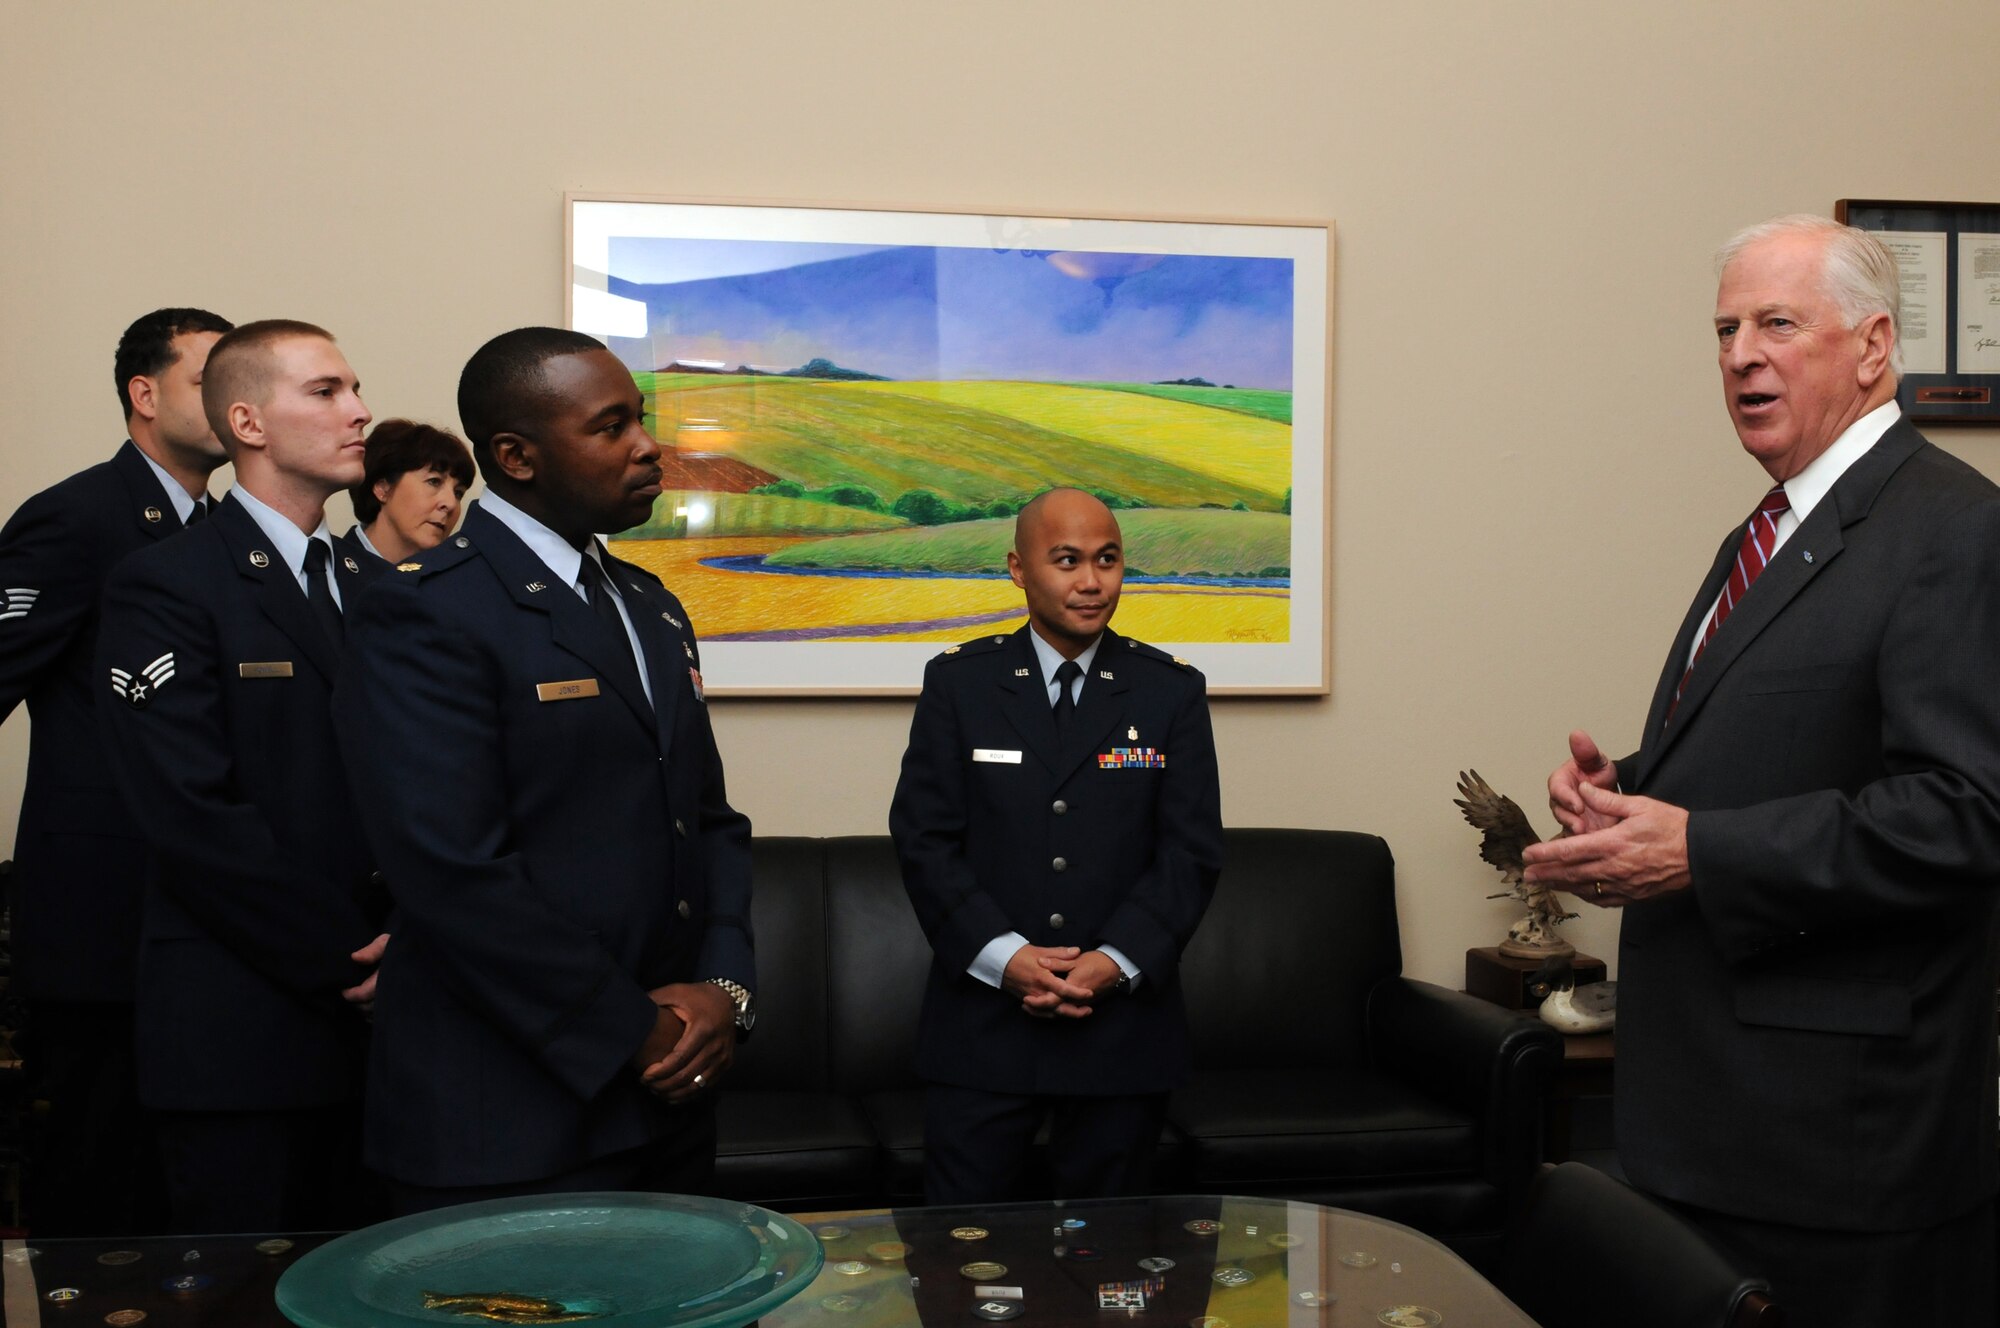 JOINT BASE ANDREWS, Md. -- Team Andrews Airmen from medical-related career fields met with U.S. Congressman Mike Thompson at the Cannon House Office Building, Washington DC Nov. 17. The meet and greet session was scheduled in conjunction with the passing of a U.S. House of Representatives resolution which honors all Airmen who support and perform Aeromedical Evacuation. Congressman Thompson sponsored the resolution along with 76 other co-sponsors. (U.S. Air Force
photo/Tech Sgt. Steve Lewis)